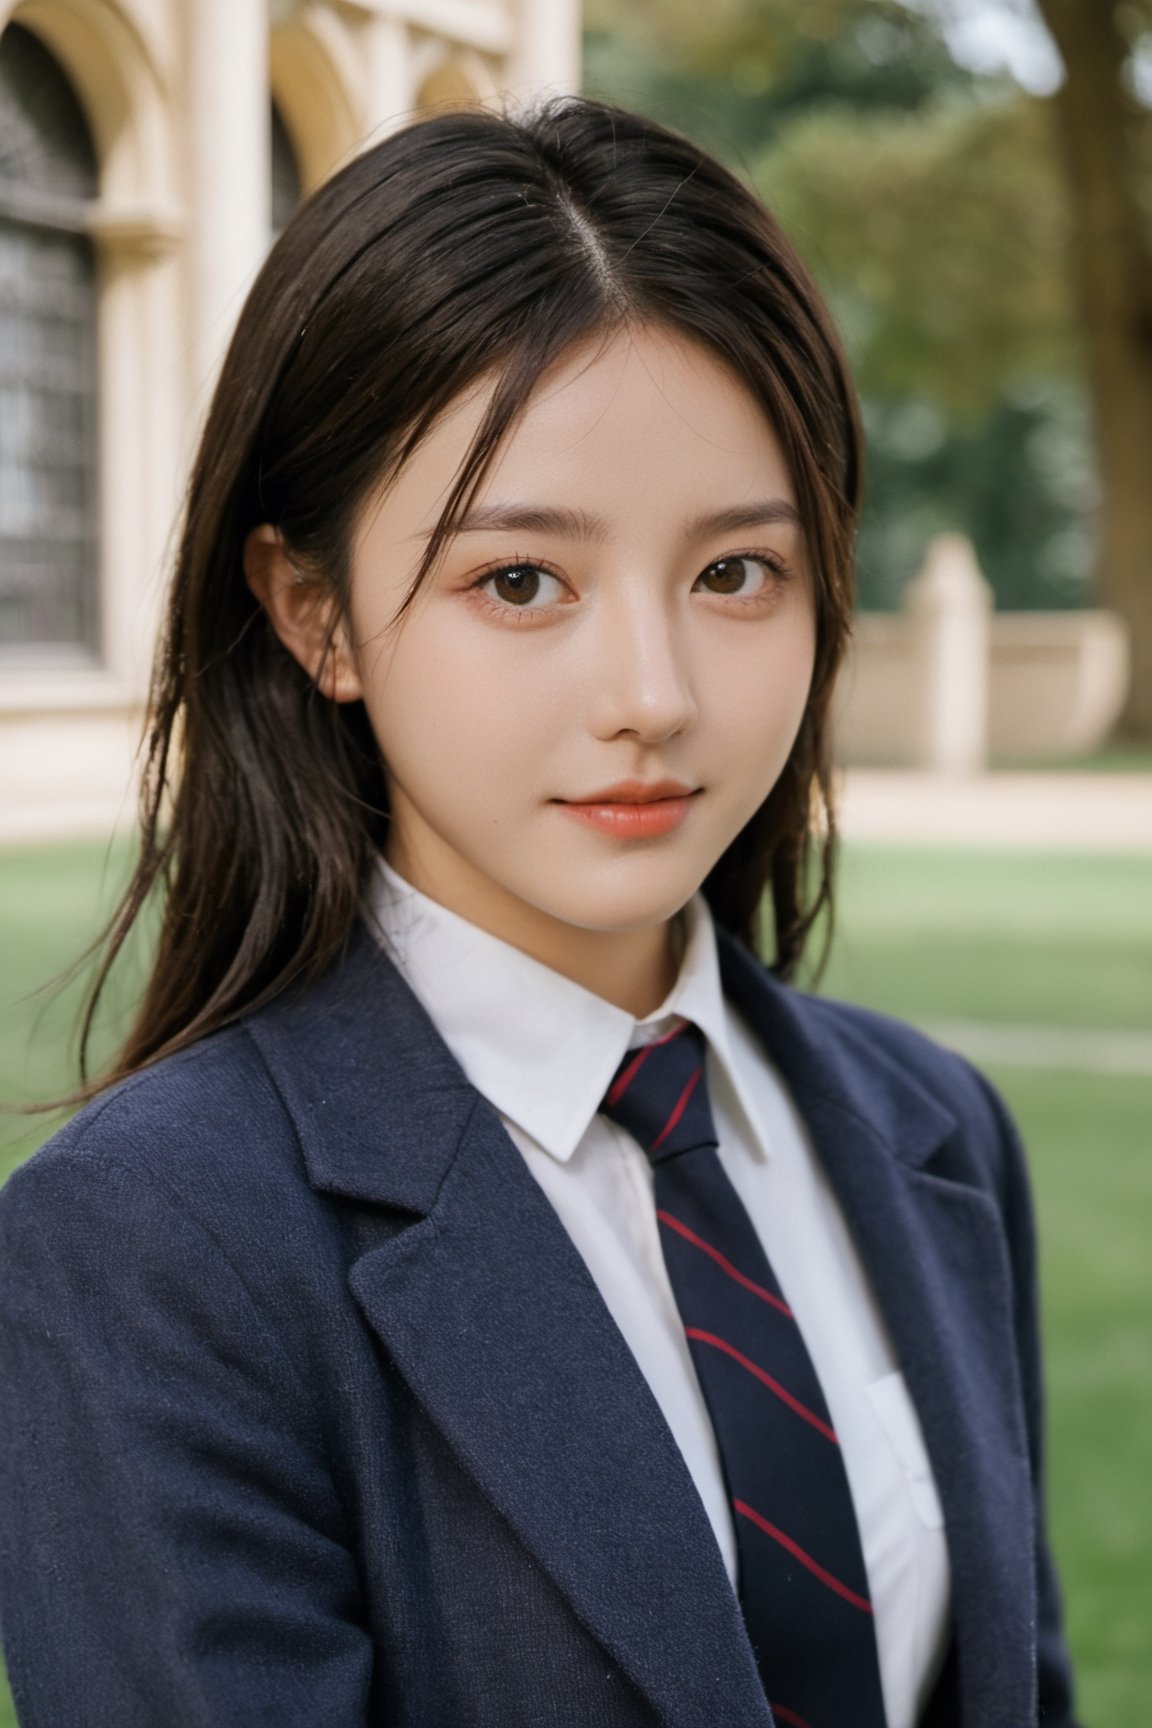 xxmix_girl, a 20 year old girl in School uniforms for British students, film, Oxford University Campus, masterpiece, smile, cold, full-body_portrait